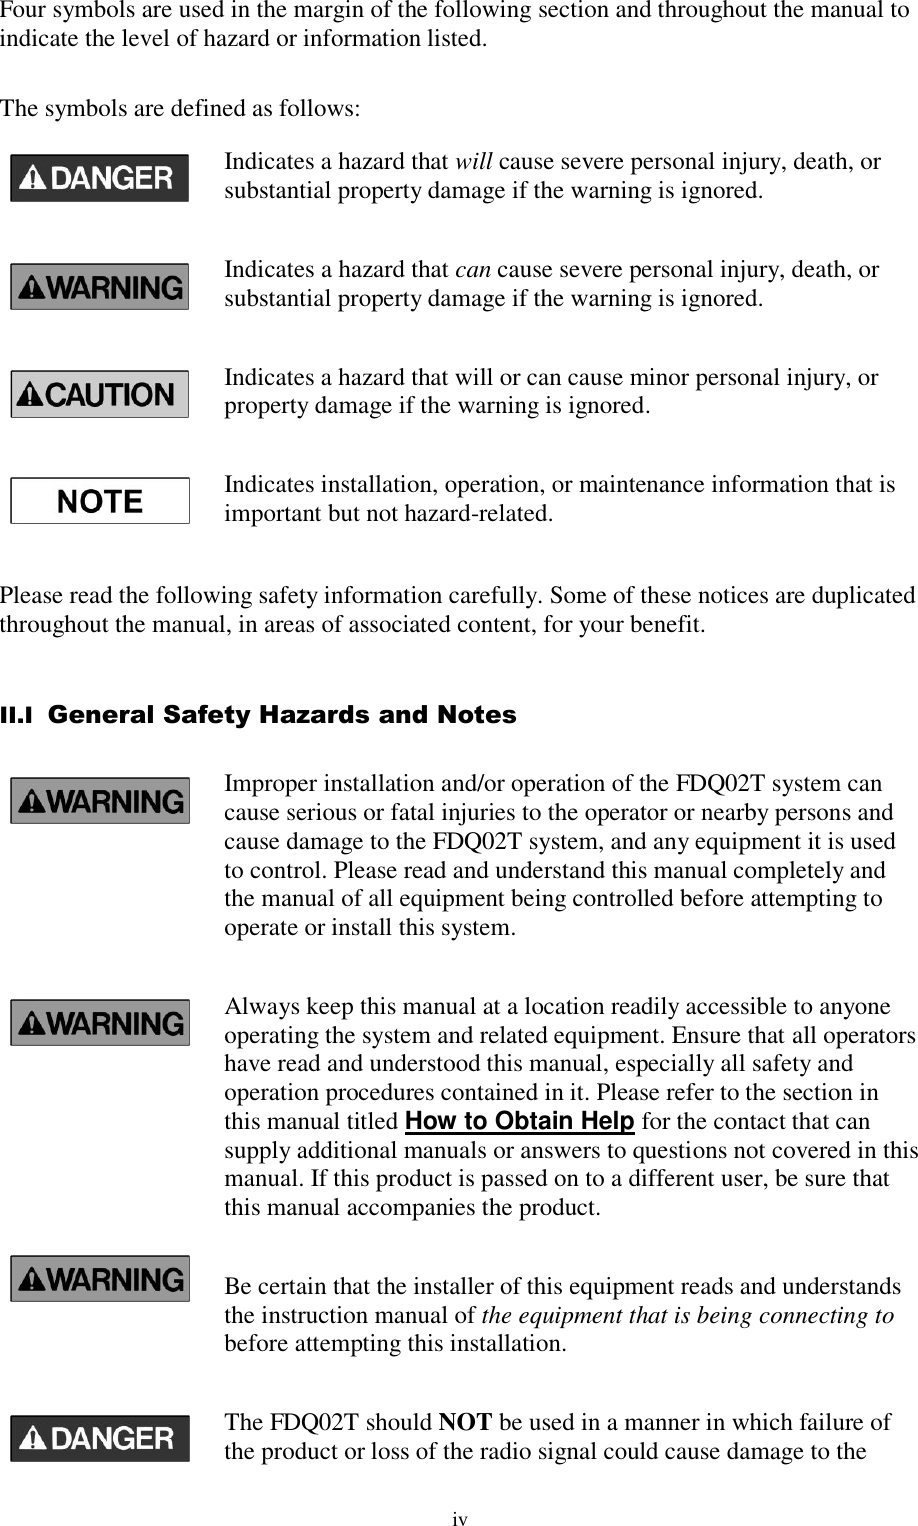  iv Four symbols are used in the margin of the following section and throughout the manual to indicate the level of hazard or information listed.  The symbols are defined as follows: Indicates a hazard that will cause severe personal injury, death, or substantial property damage if the warning is ignored. Indicates a hazard that can cause severe personal injury, death, or substantial property damage if the warning is ignored. Indicates a hazard that will or can cause minor personal injury, or property damage if the warning is ignored. Indicates installation, operation, or maintenance information that is important but not hazard-related.  Please read the following safety information carefully. Some of these notices are duplicated throughout the manual, in areas of associated content, for your benefit.  II.I  General Safety Hazards and Notes Improper installation and/or operation of the FDQ02T system can cause serious or fatal injuries to the operator or nearby persons and cause damage to the FDQ02T system, and any equipment it is used to control. Please read and understand this manual completely and the manual of all equipment being controlled before attempting to operate or install this system. Always keep this manual at a location readily accessible to anyone operating the system and related equipment. Ensure that all operators have read and understood this manual, especially all safety and operation procedures contained in it. Please refer to the section in this manual titled How to Obtain Help for the contact that can supply additional manuals or answers to questions not covered in this manual. If this product is passed on to a different user, be sure that this manual accompanies the product. Be certain that the installer of this equipment reads and understands the instruction manual of the equipment that is being connecting to before attempting this installation. The FDQ02T should NOT be used in a manner in which failure of the product or loss of the radio signal could cause damage to the 